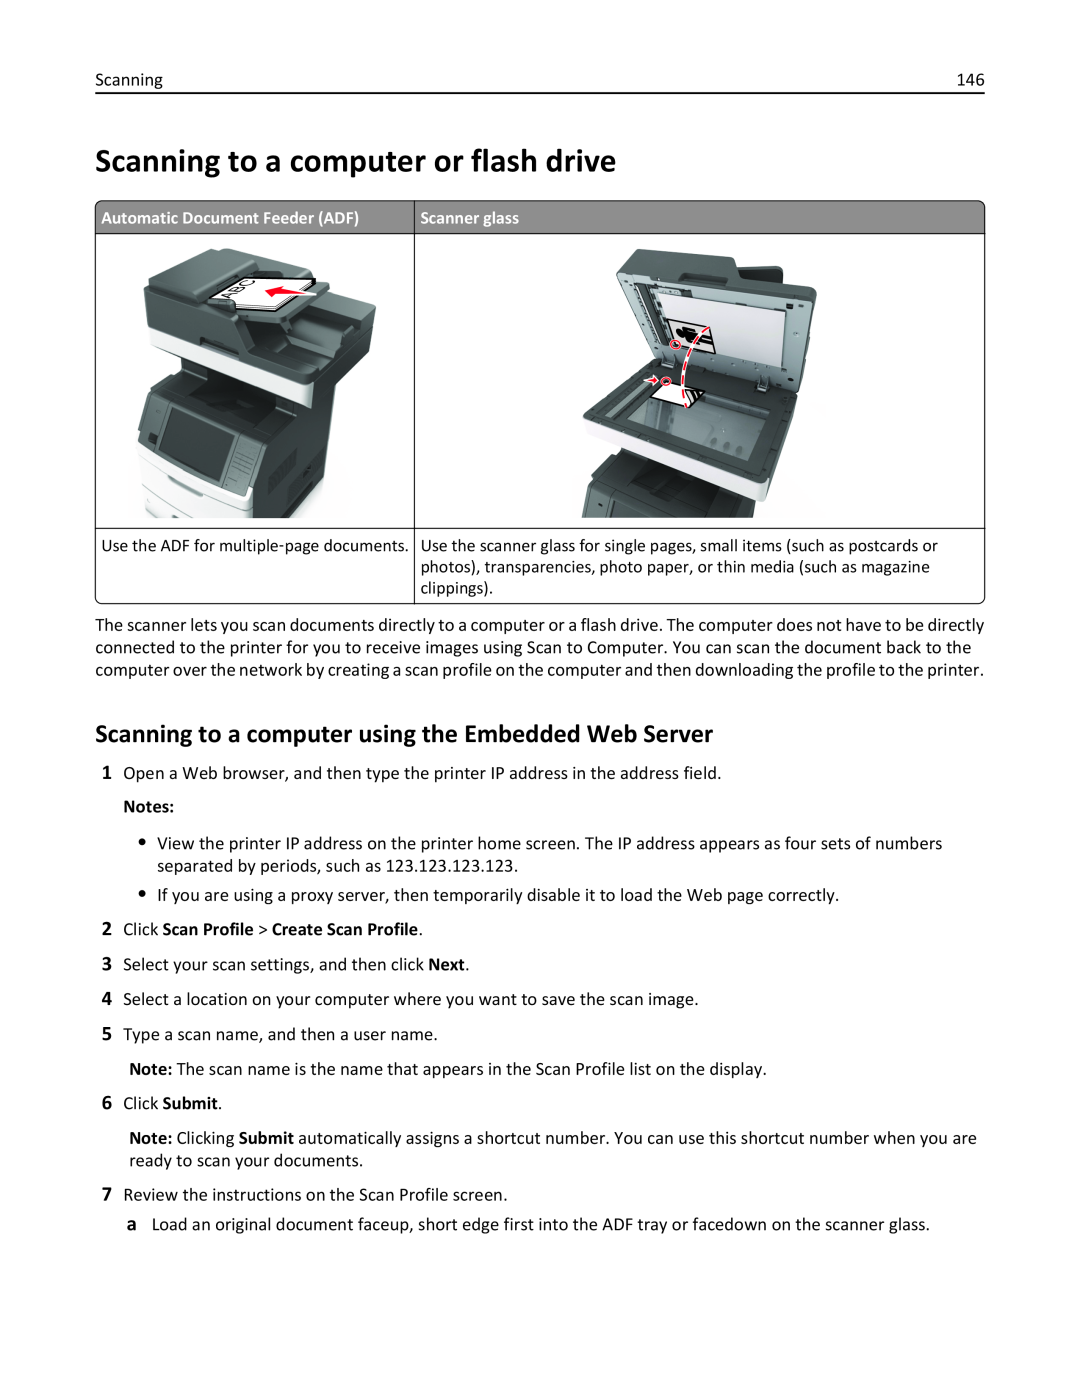 Lexmark MX710DHE, 24T7310 Scanning to a computer or flash drive, Scanning to a computer using the Embedded Web Server 